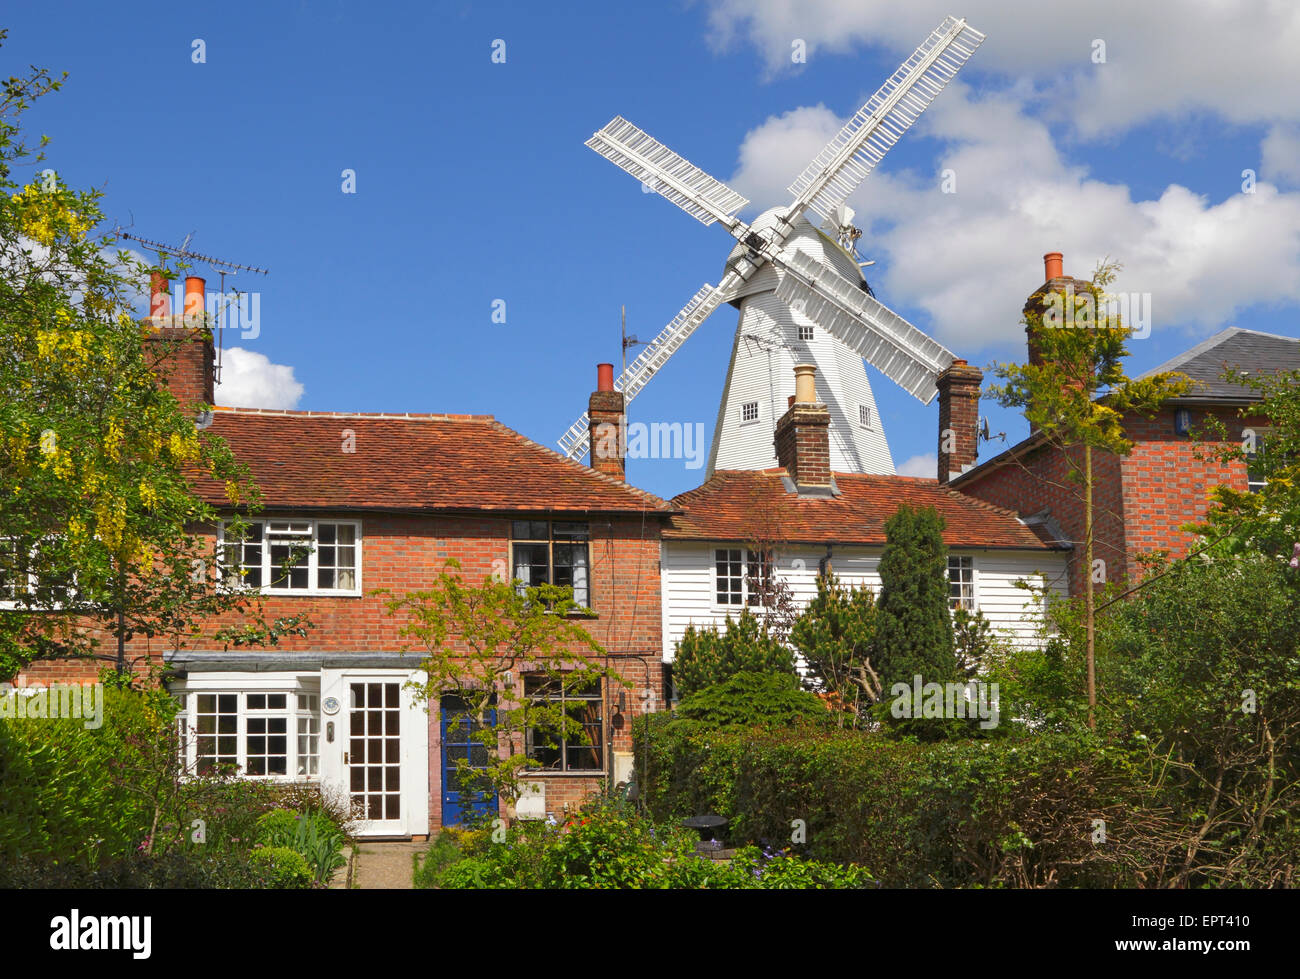 The Union windmill overlooking the country town of Cranbrook, Kent, England, Britain, UK Stock Photo